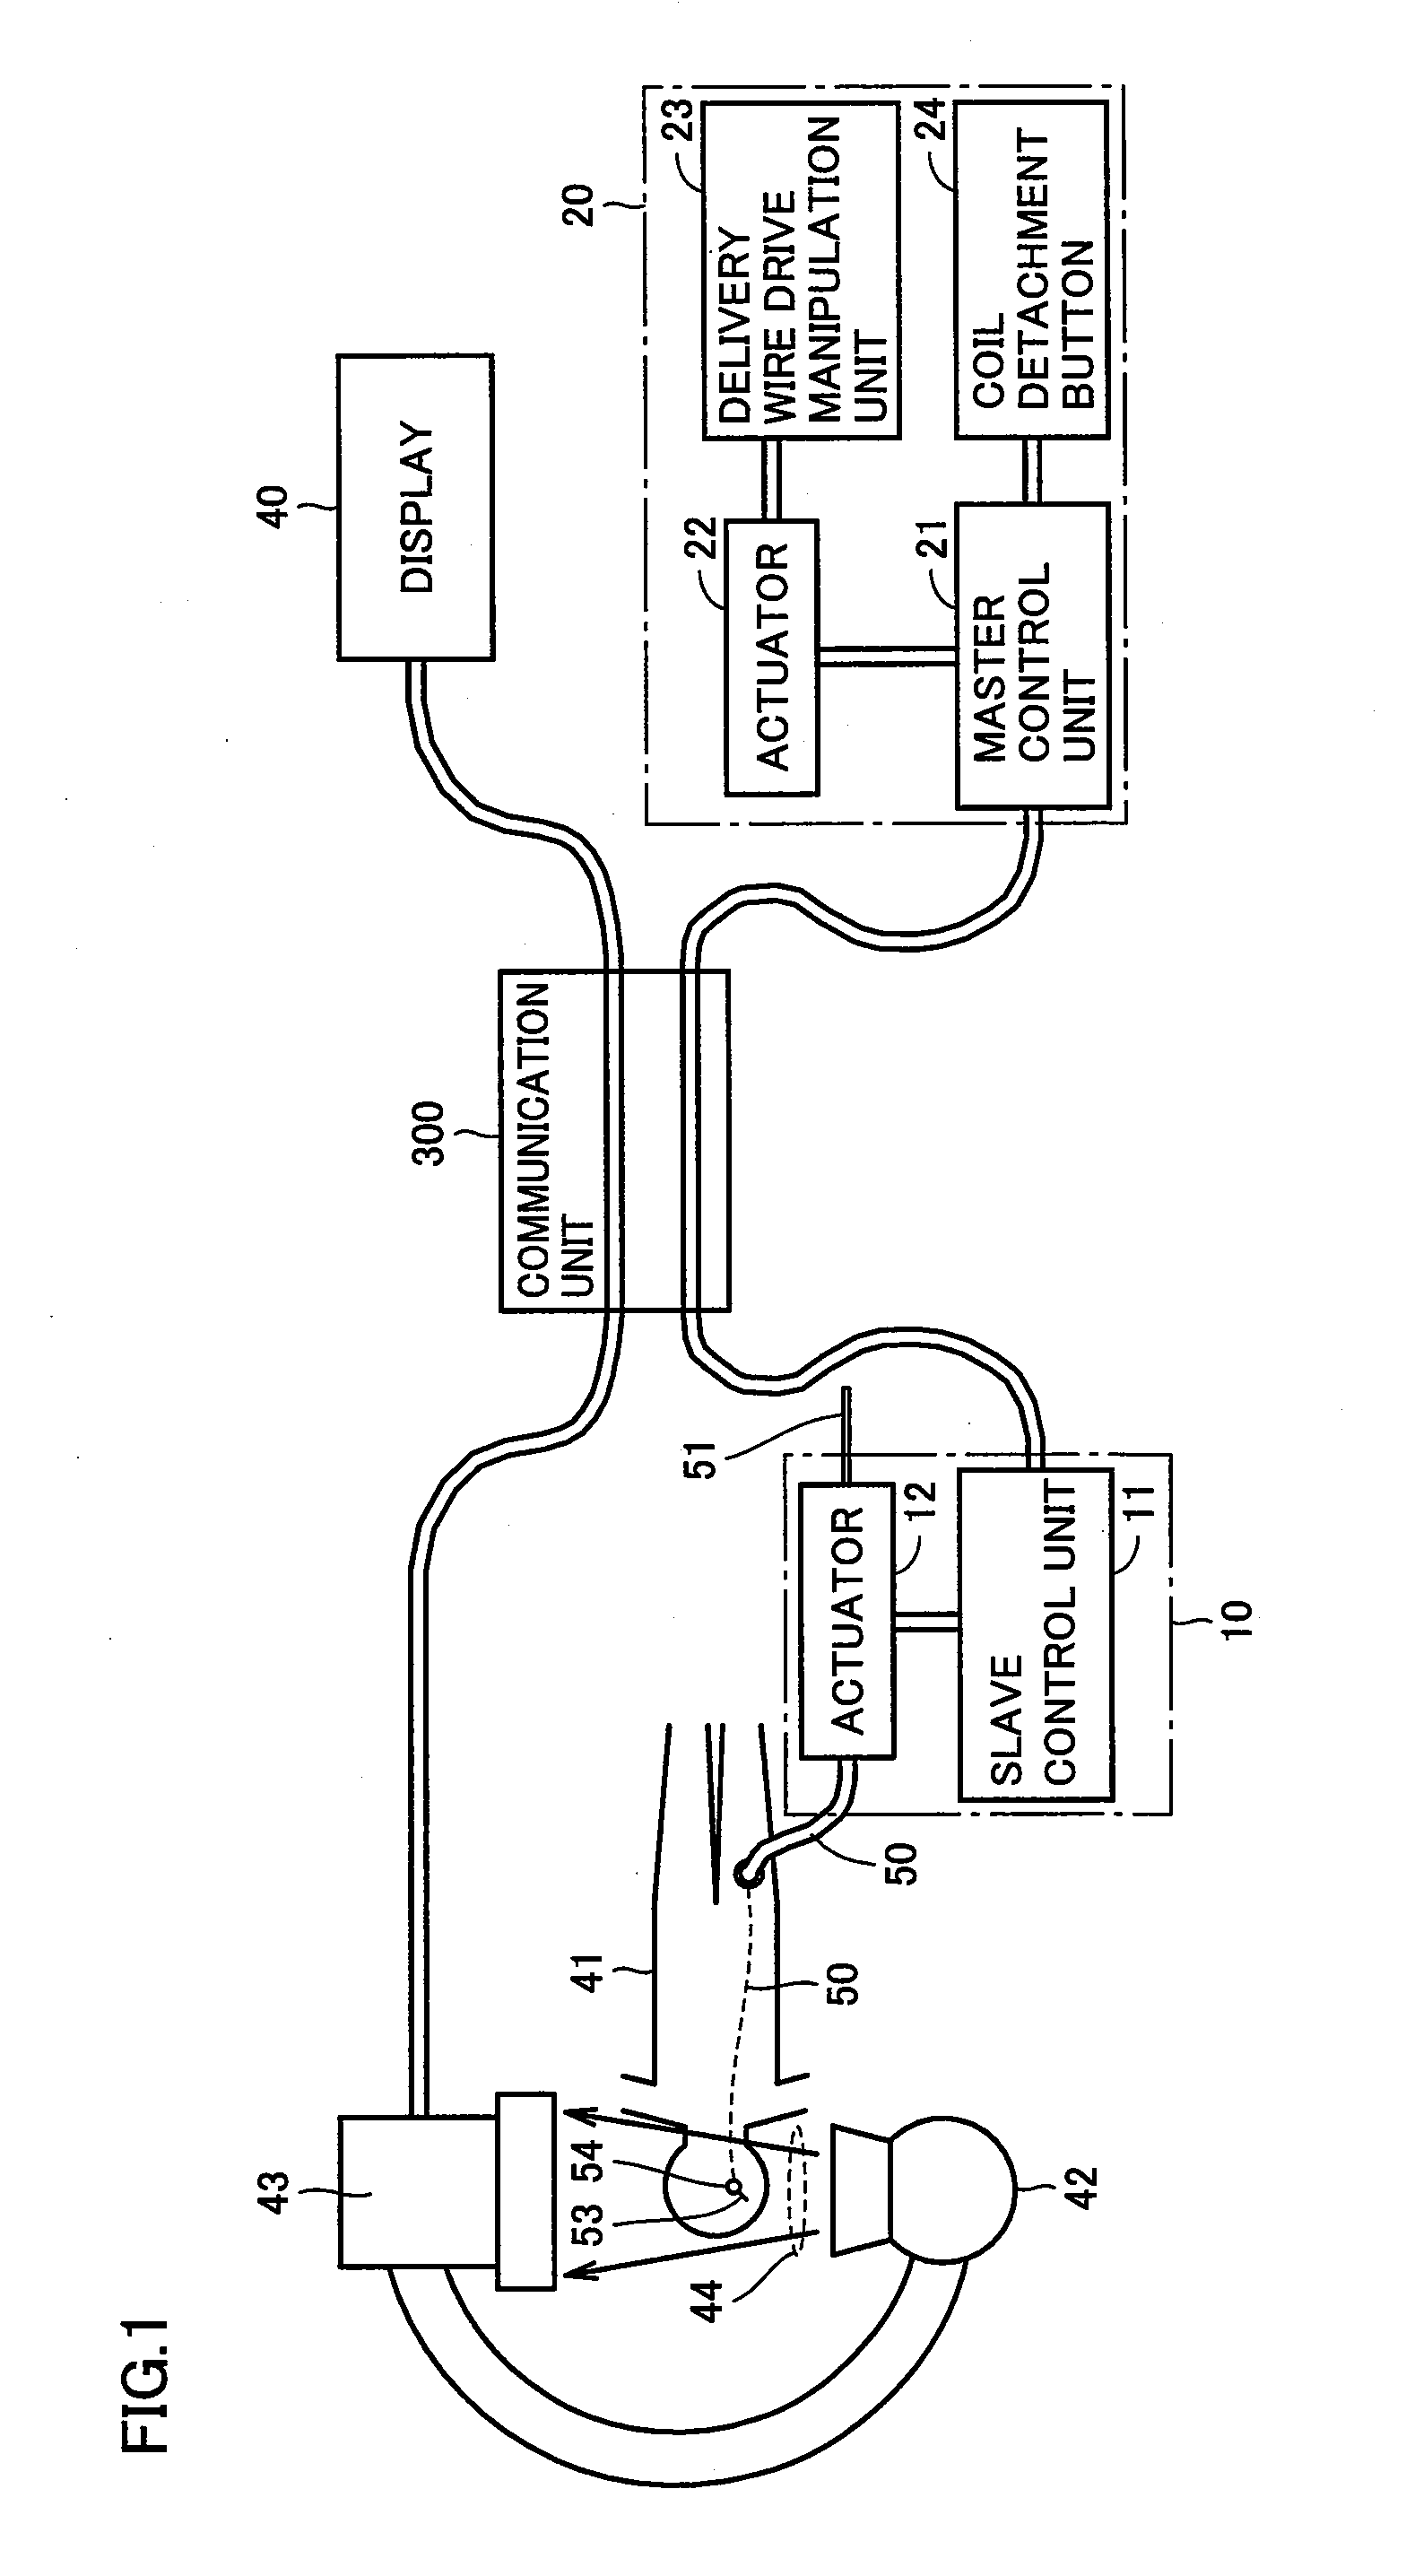 Linear object manipulation control device for controlling manipulation of linear object by operator